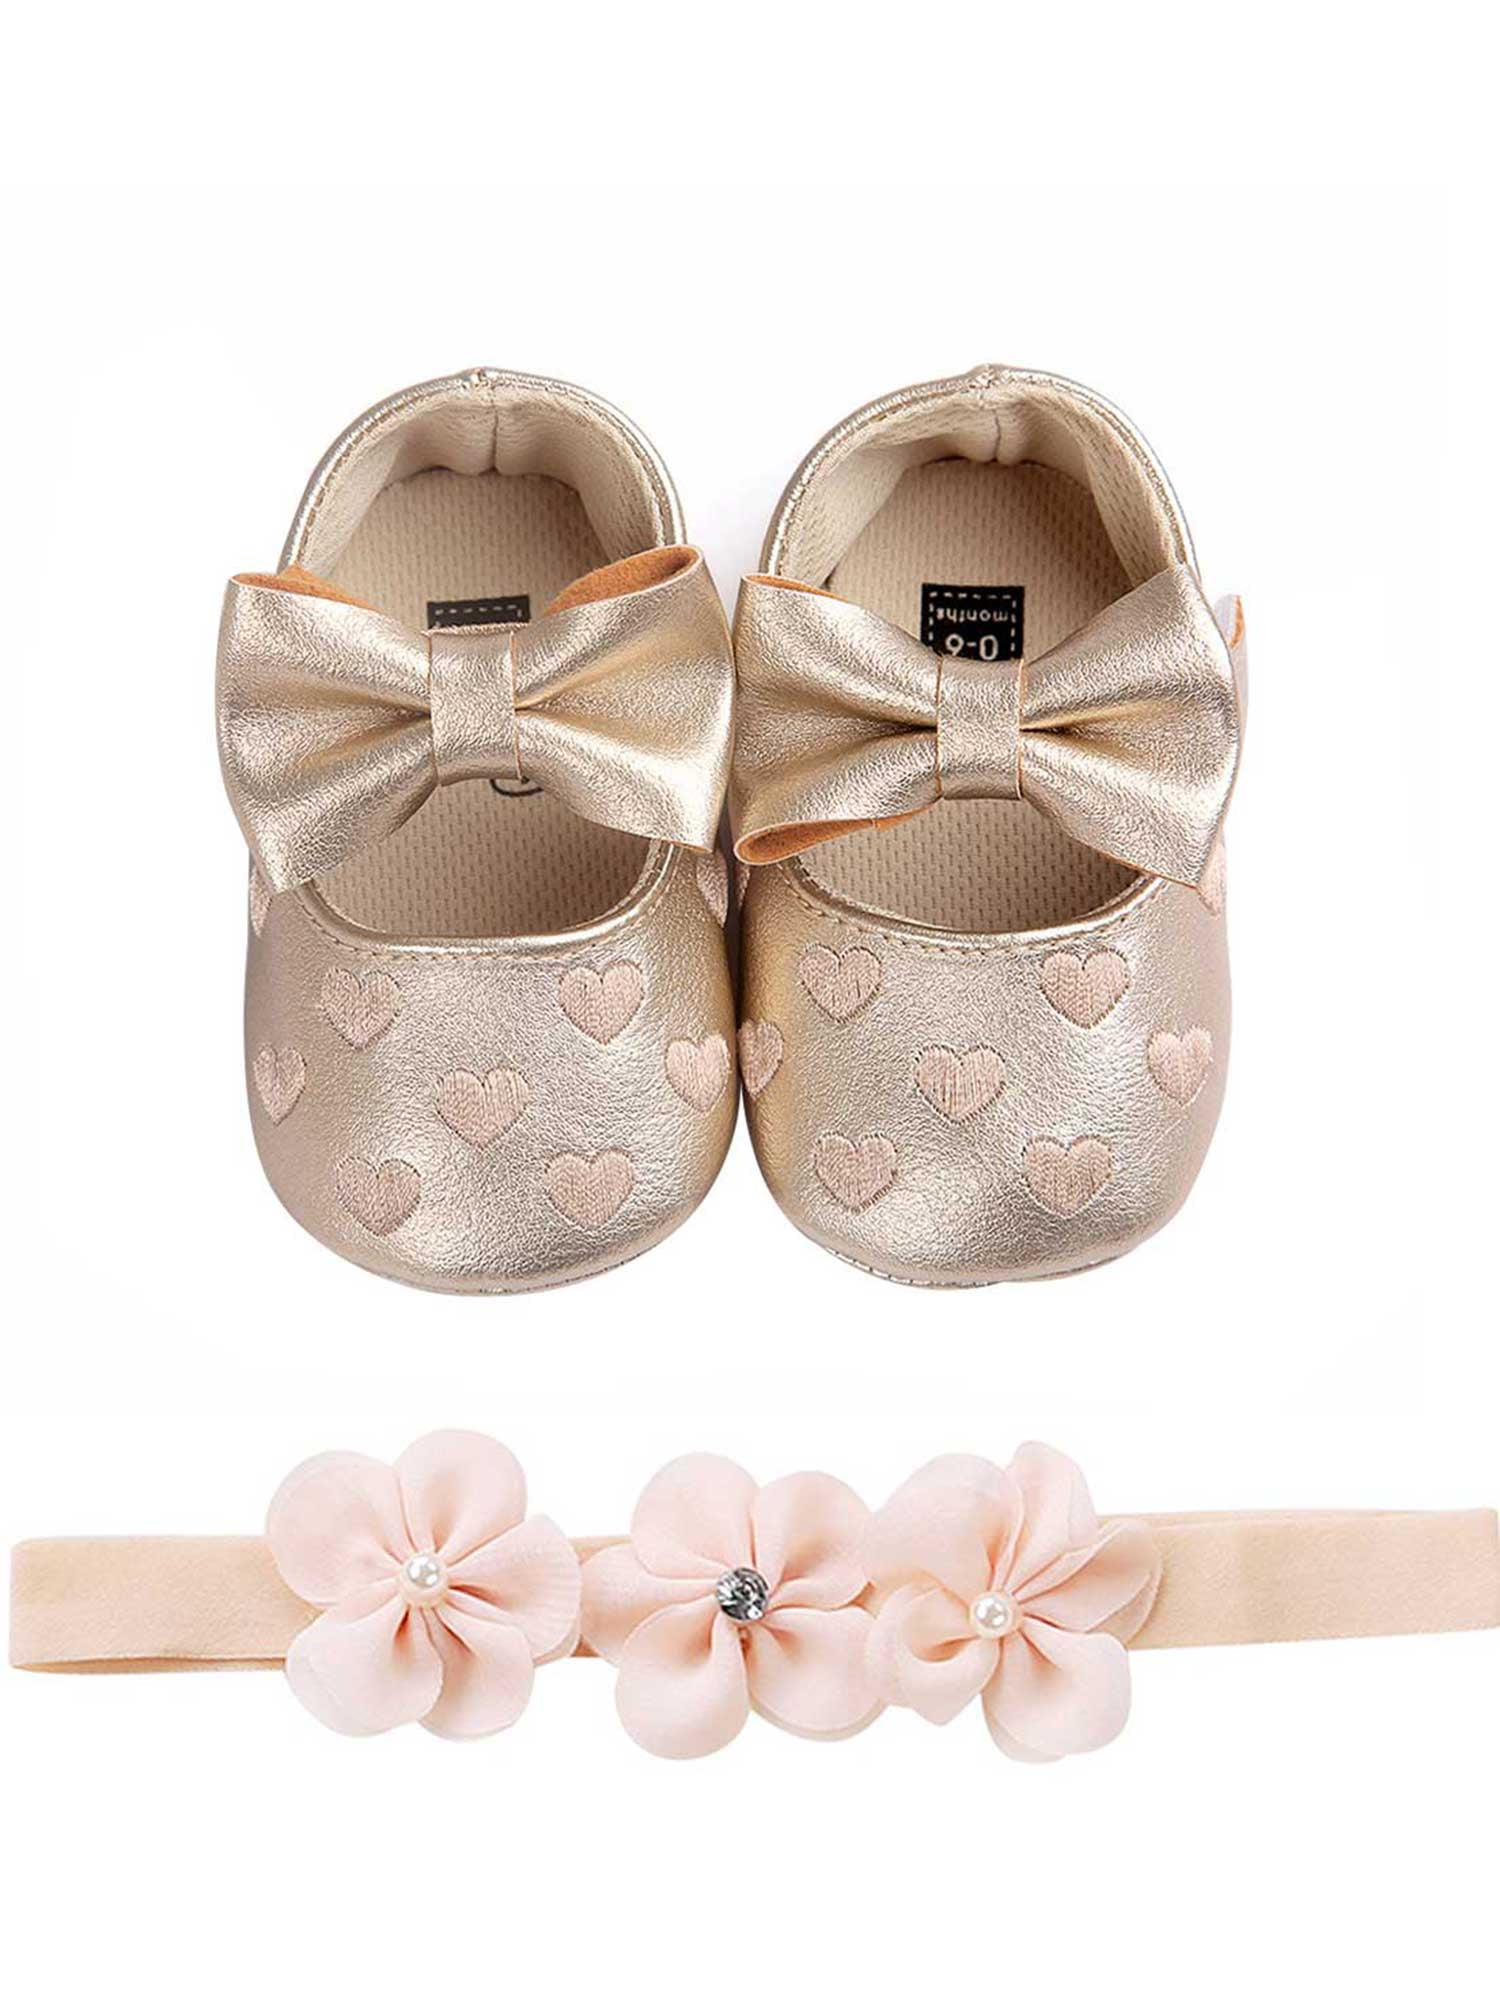 Baby Girls Bowknot Mary Jane Shoes and Hairband Gift Set for Baby Christening Toddler Girl Soft Sole Anti-Slip First Walking Shoes 